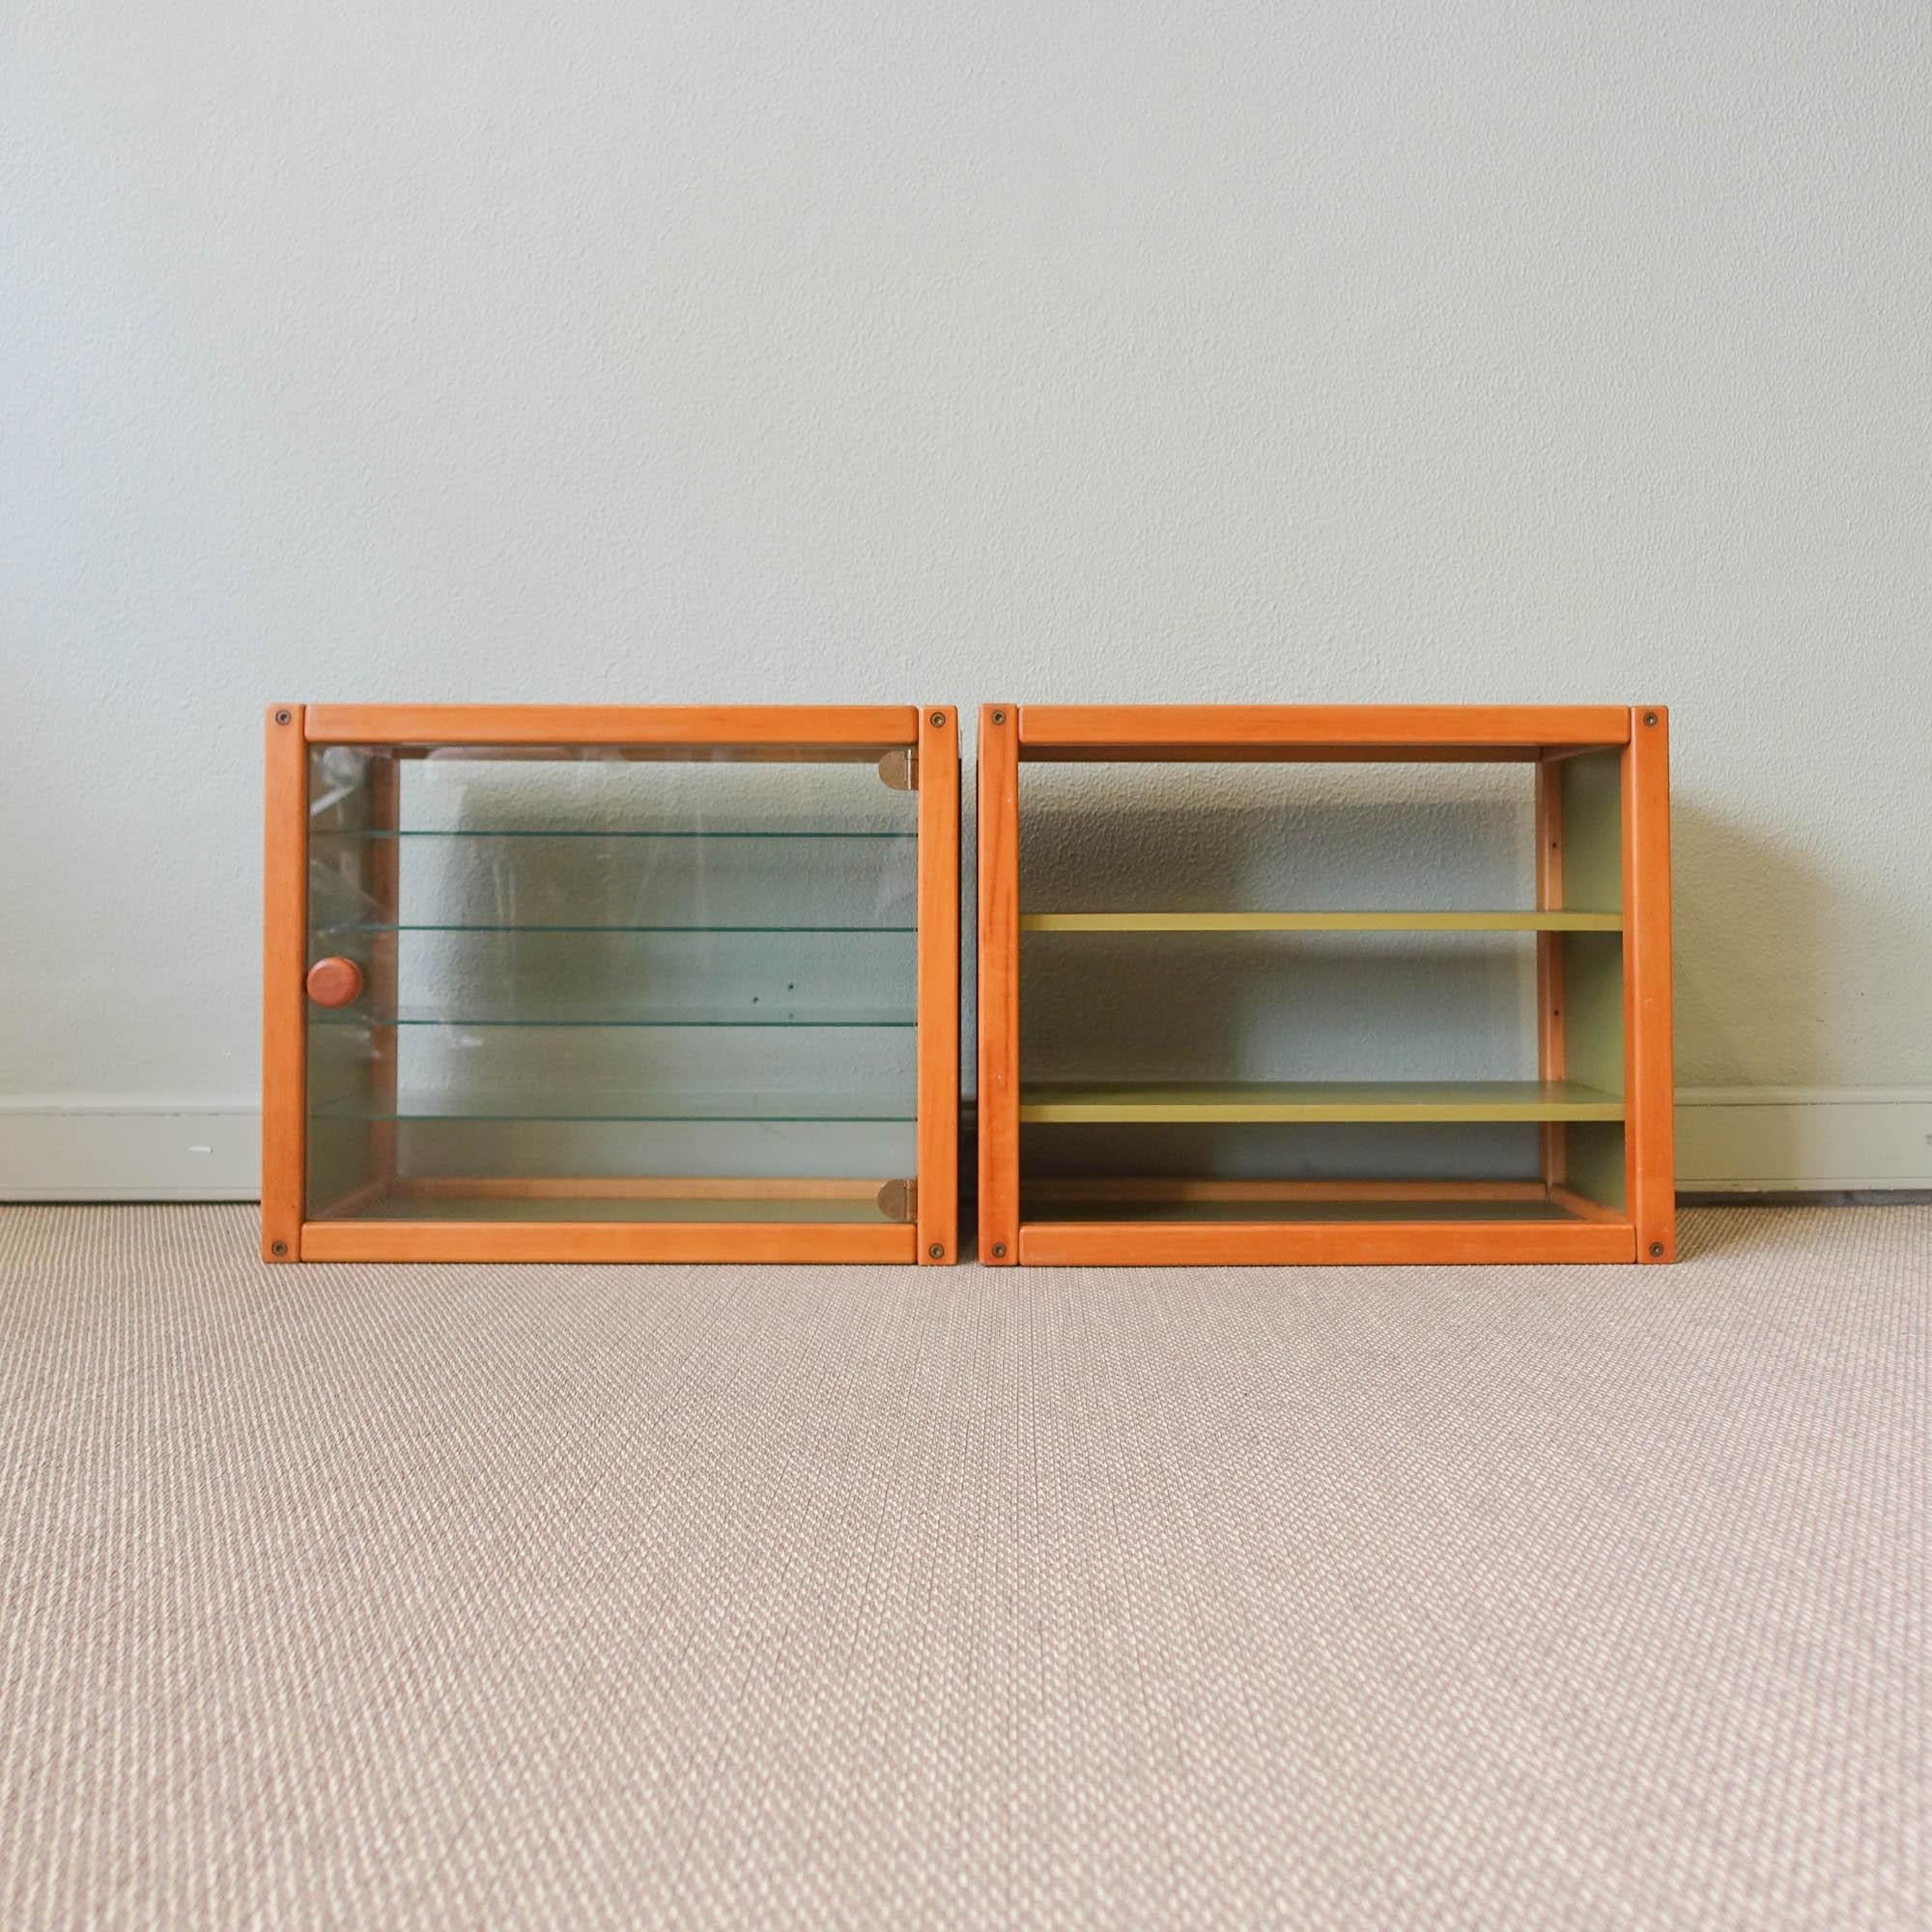 This pair of Glass Storage Units from the Profilsystem Collection, was designed by Elmar Flötotto for Flötotto, in Germany, during the 1980's. The principle behind the Profilsystem it is simple. The modules can be easily combined with one another.